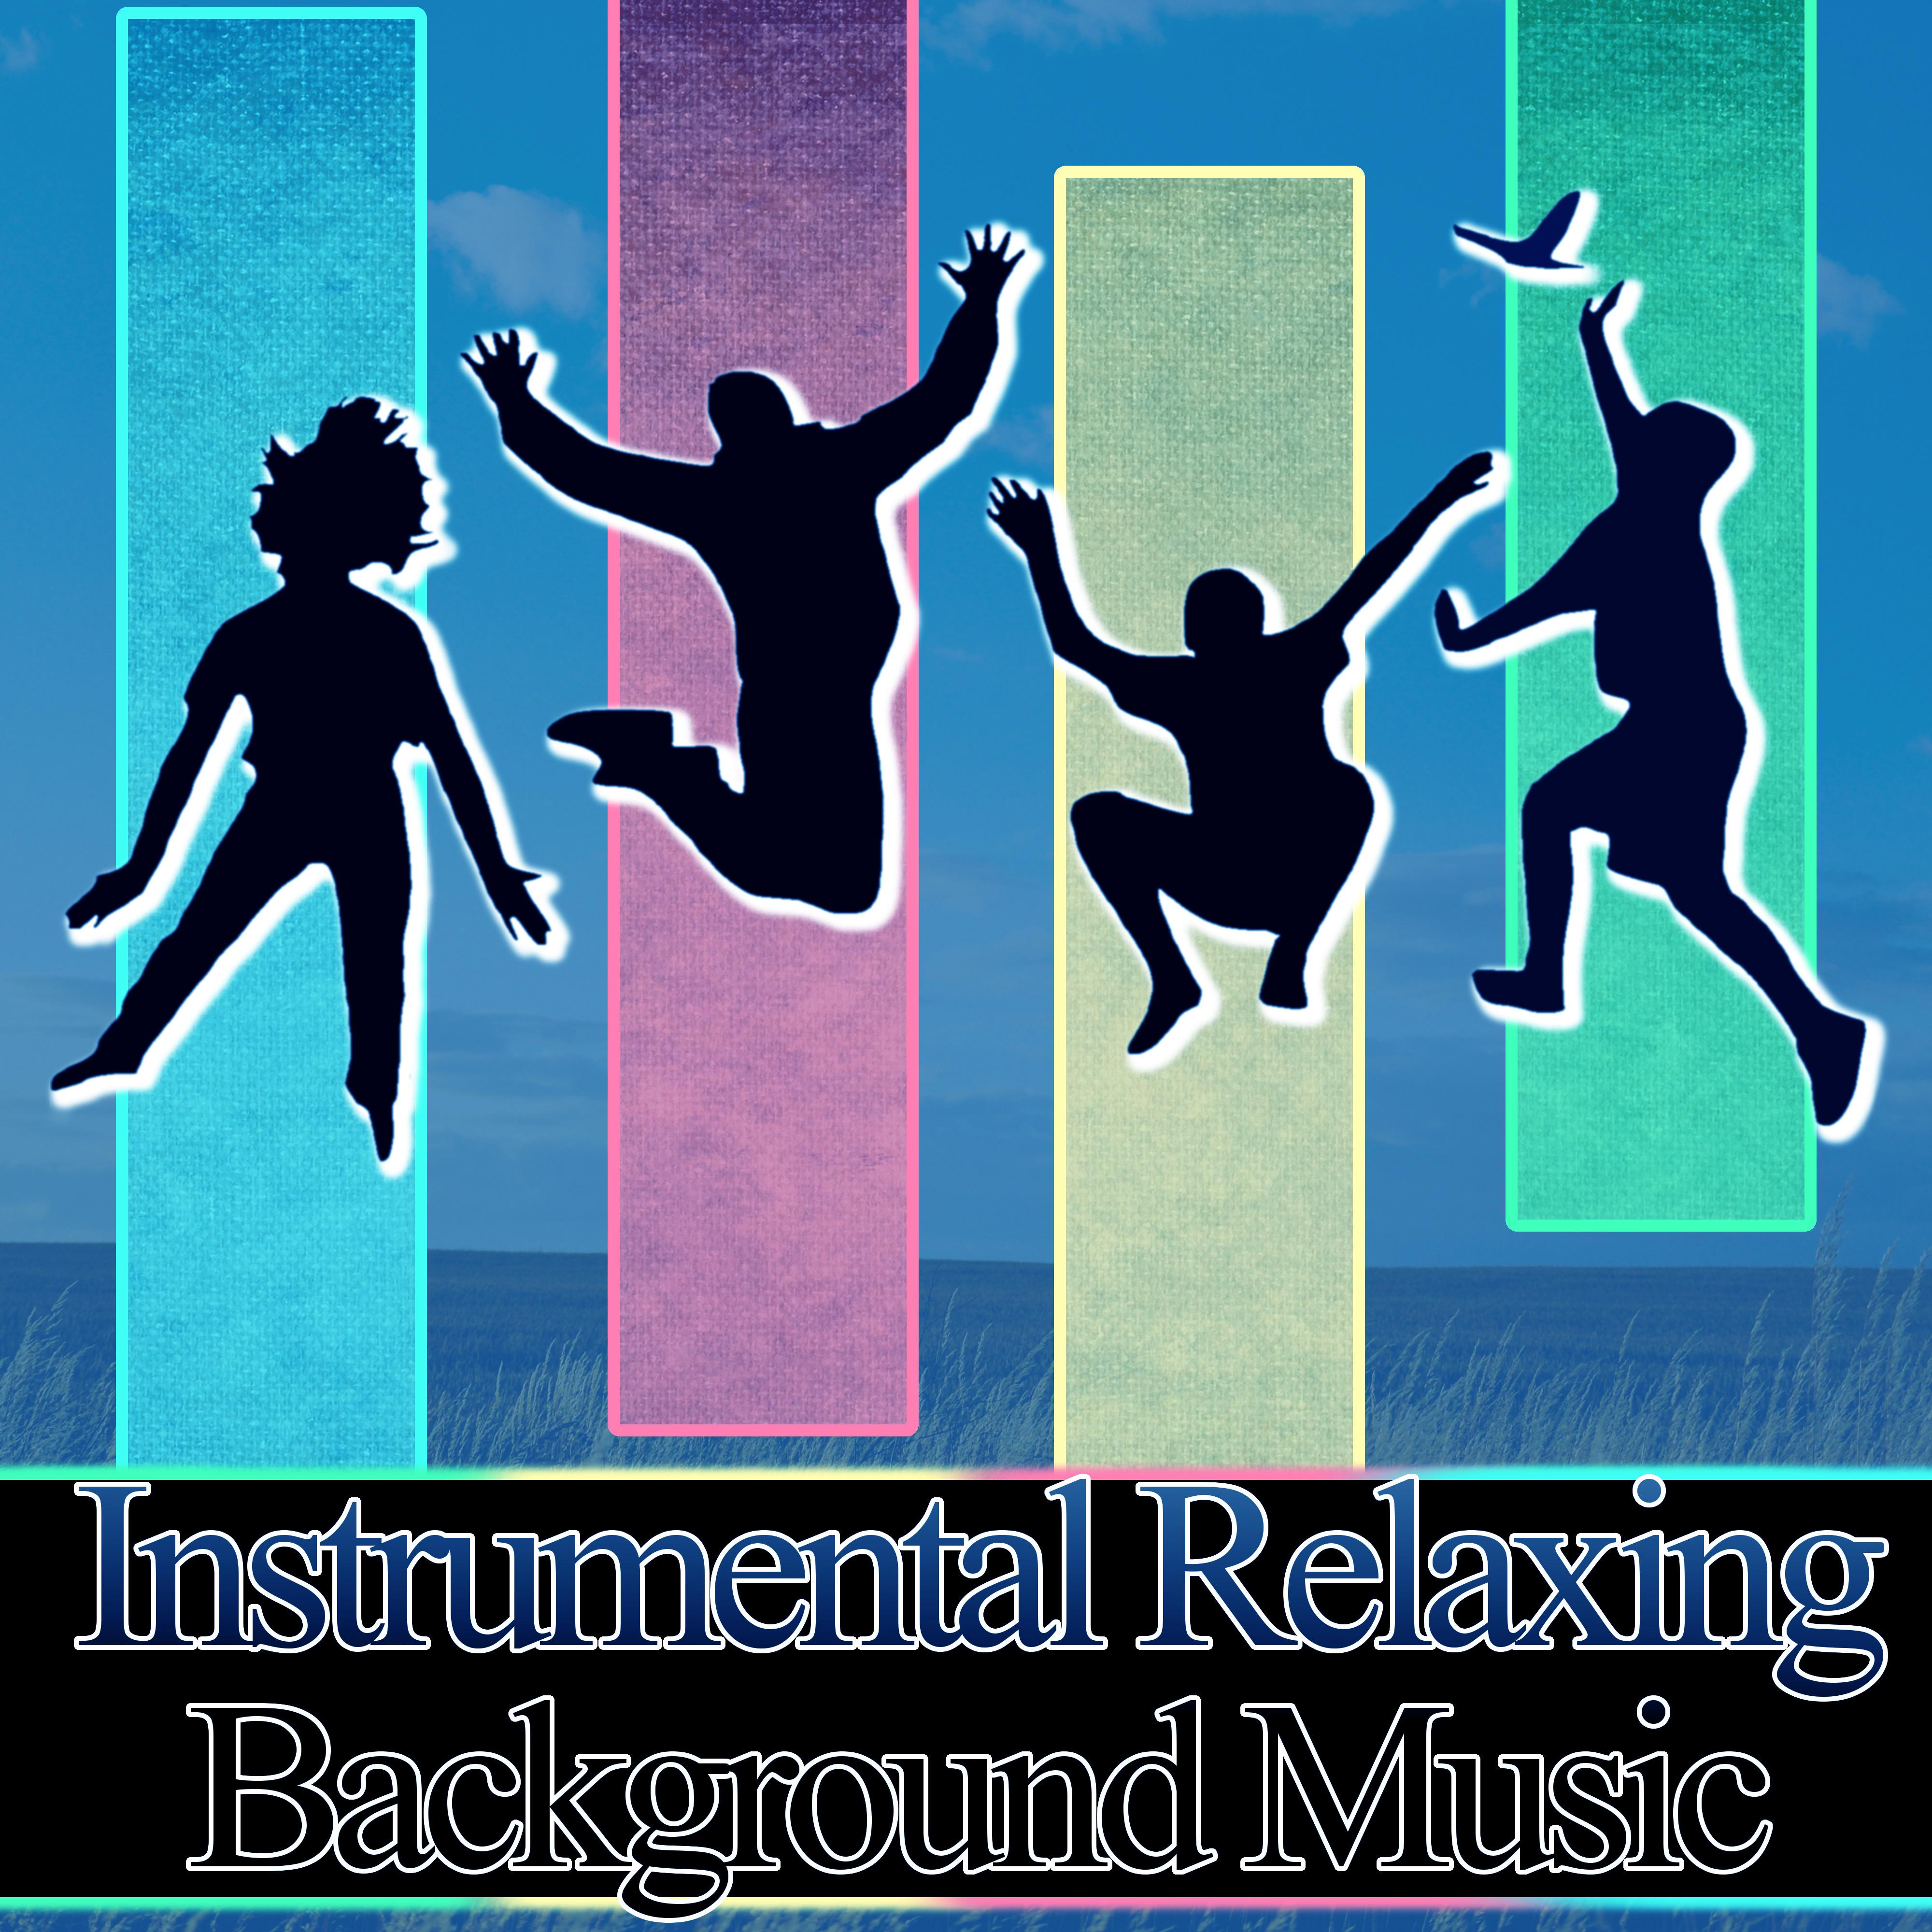 Instrumental Relaxing Background Music - Sleep and Chill Lounge, Easy Listening Instrumentals, Reduce Stress, Just Relax